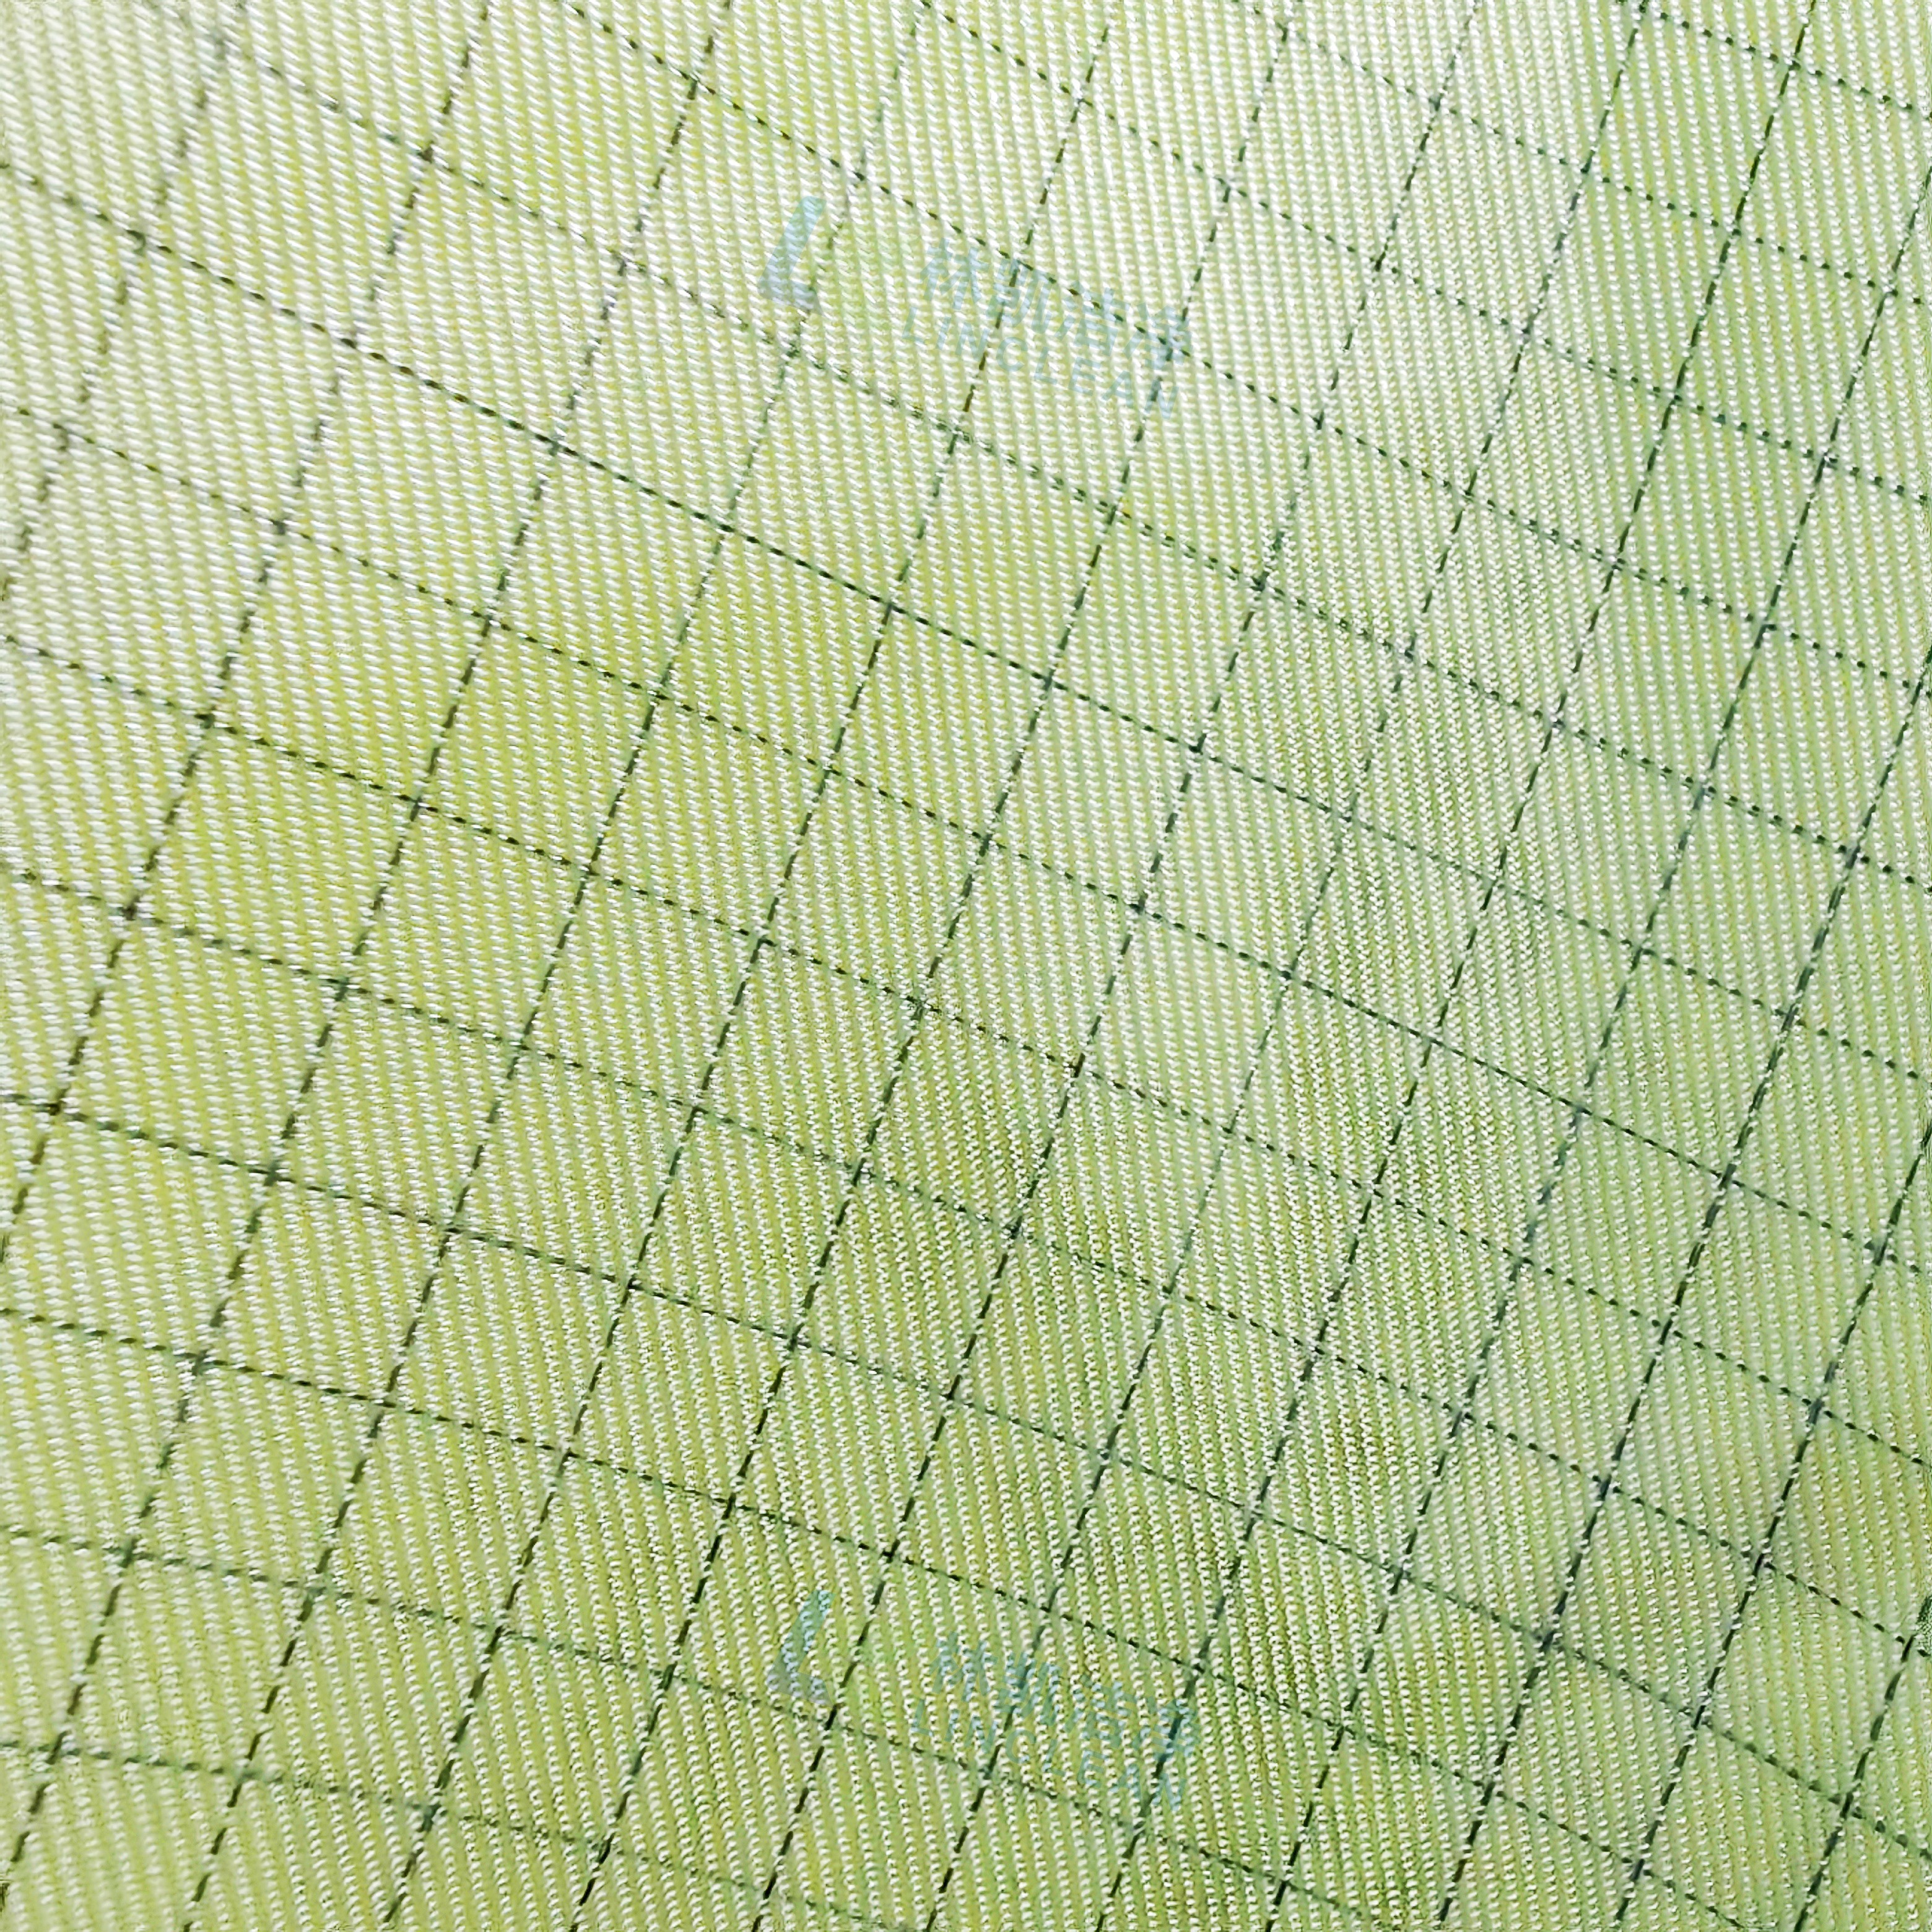 Yellow 5mm Grid Antistatic ESD Anti-static Fabric for Lab Clothing